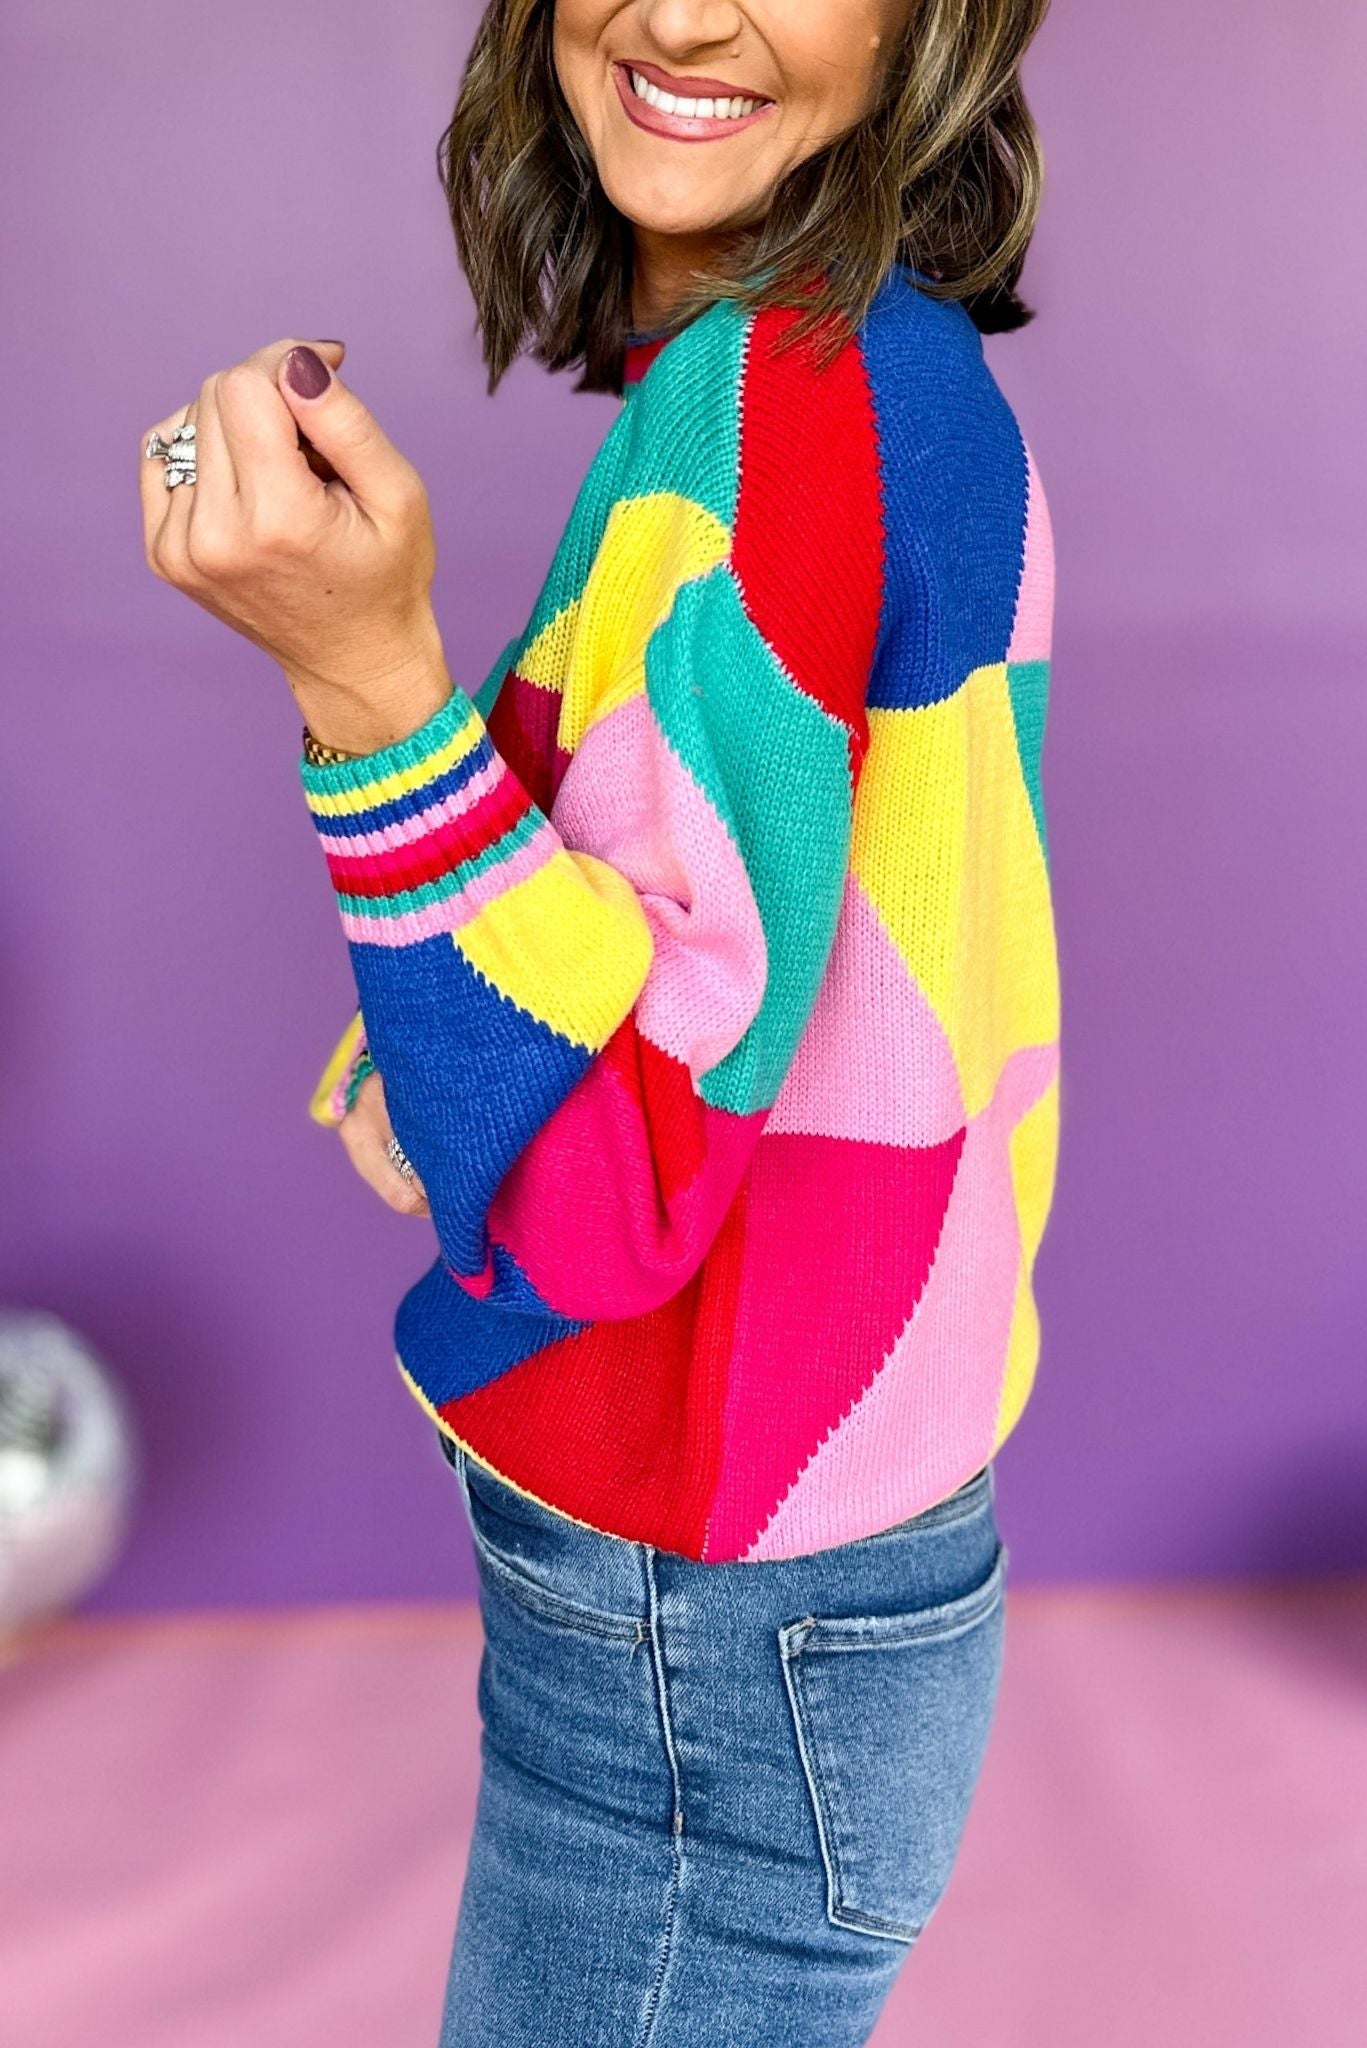 Load image into Gallery viewer, Pink Geometric Printed Drop Shoulder Sweater, elevated style, elevated sweater, printed sweater, must ahev print, must have sweater, fall style, fall sweater, fun mom style, fun mom sweater, shop style your senses by mallory fitzsimmons
